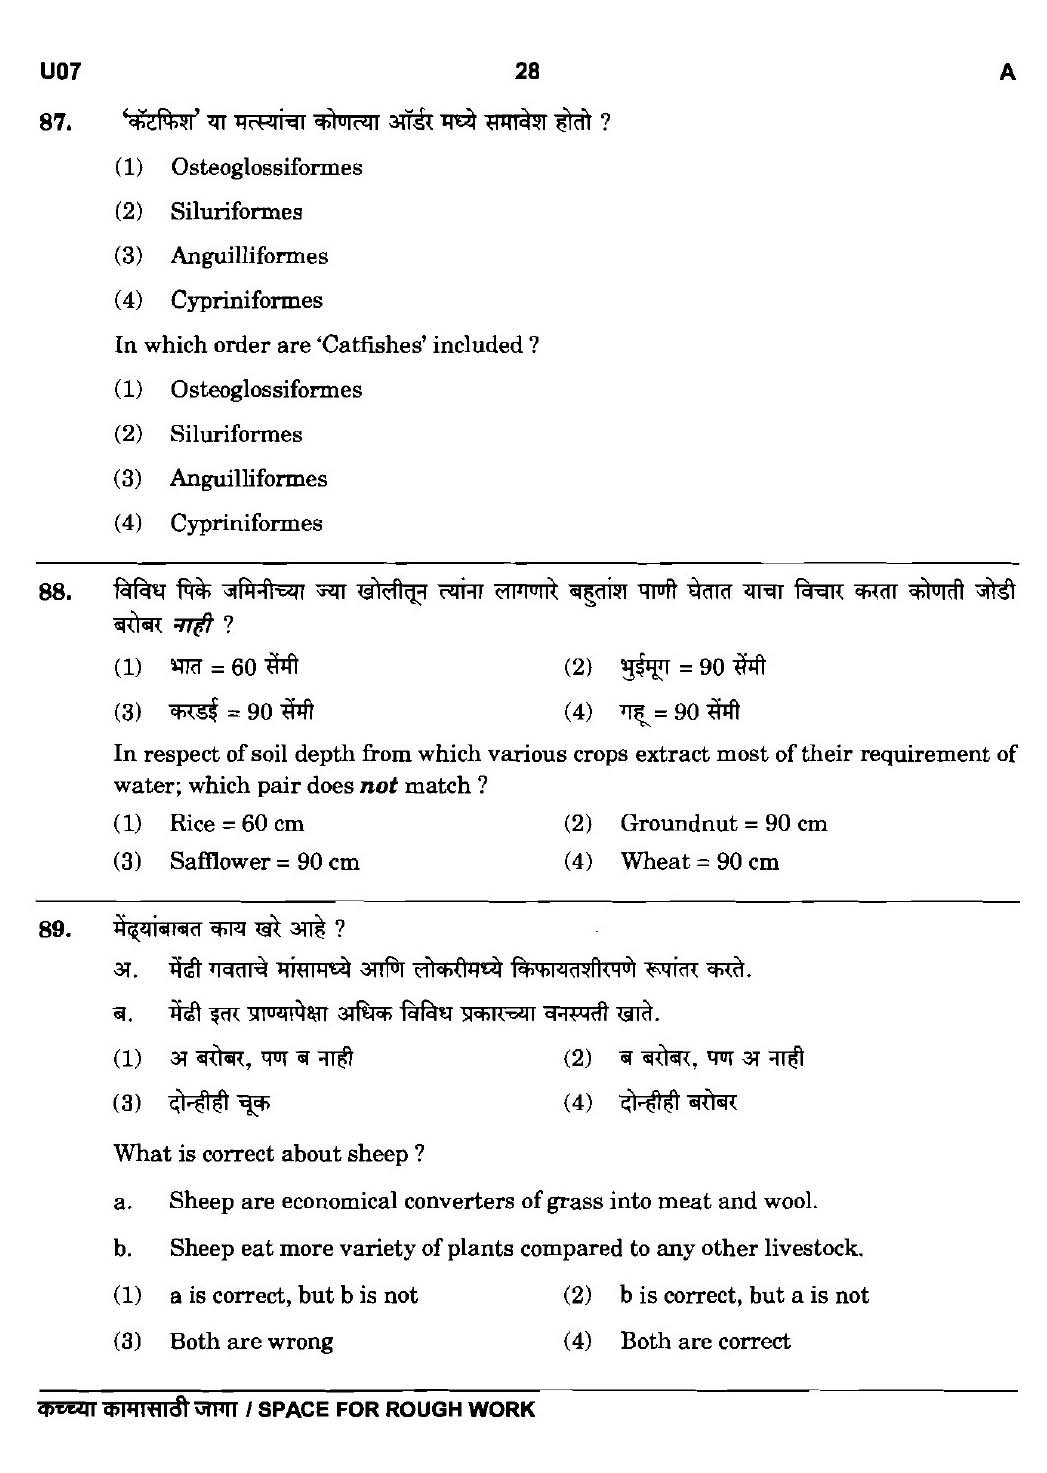 MPSC Agricultural Services Preliminary Exam 2016 Question Paper 27